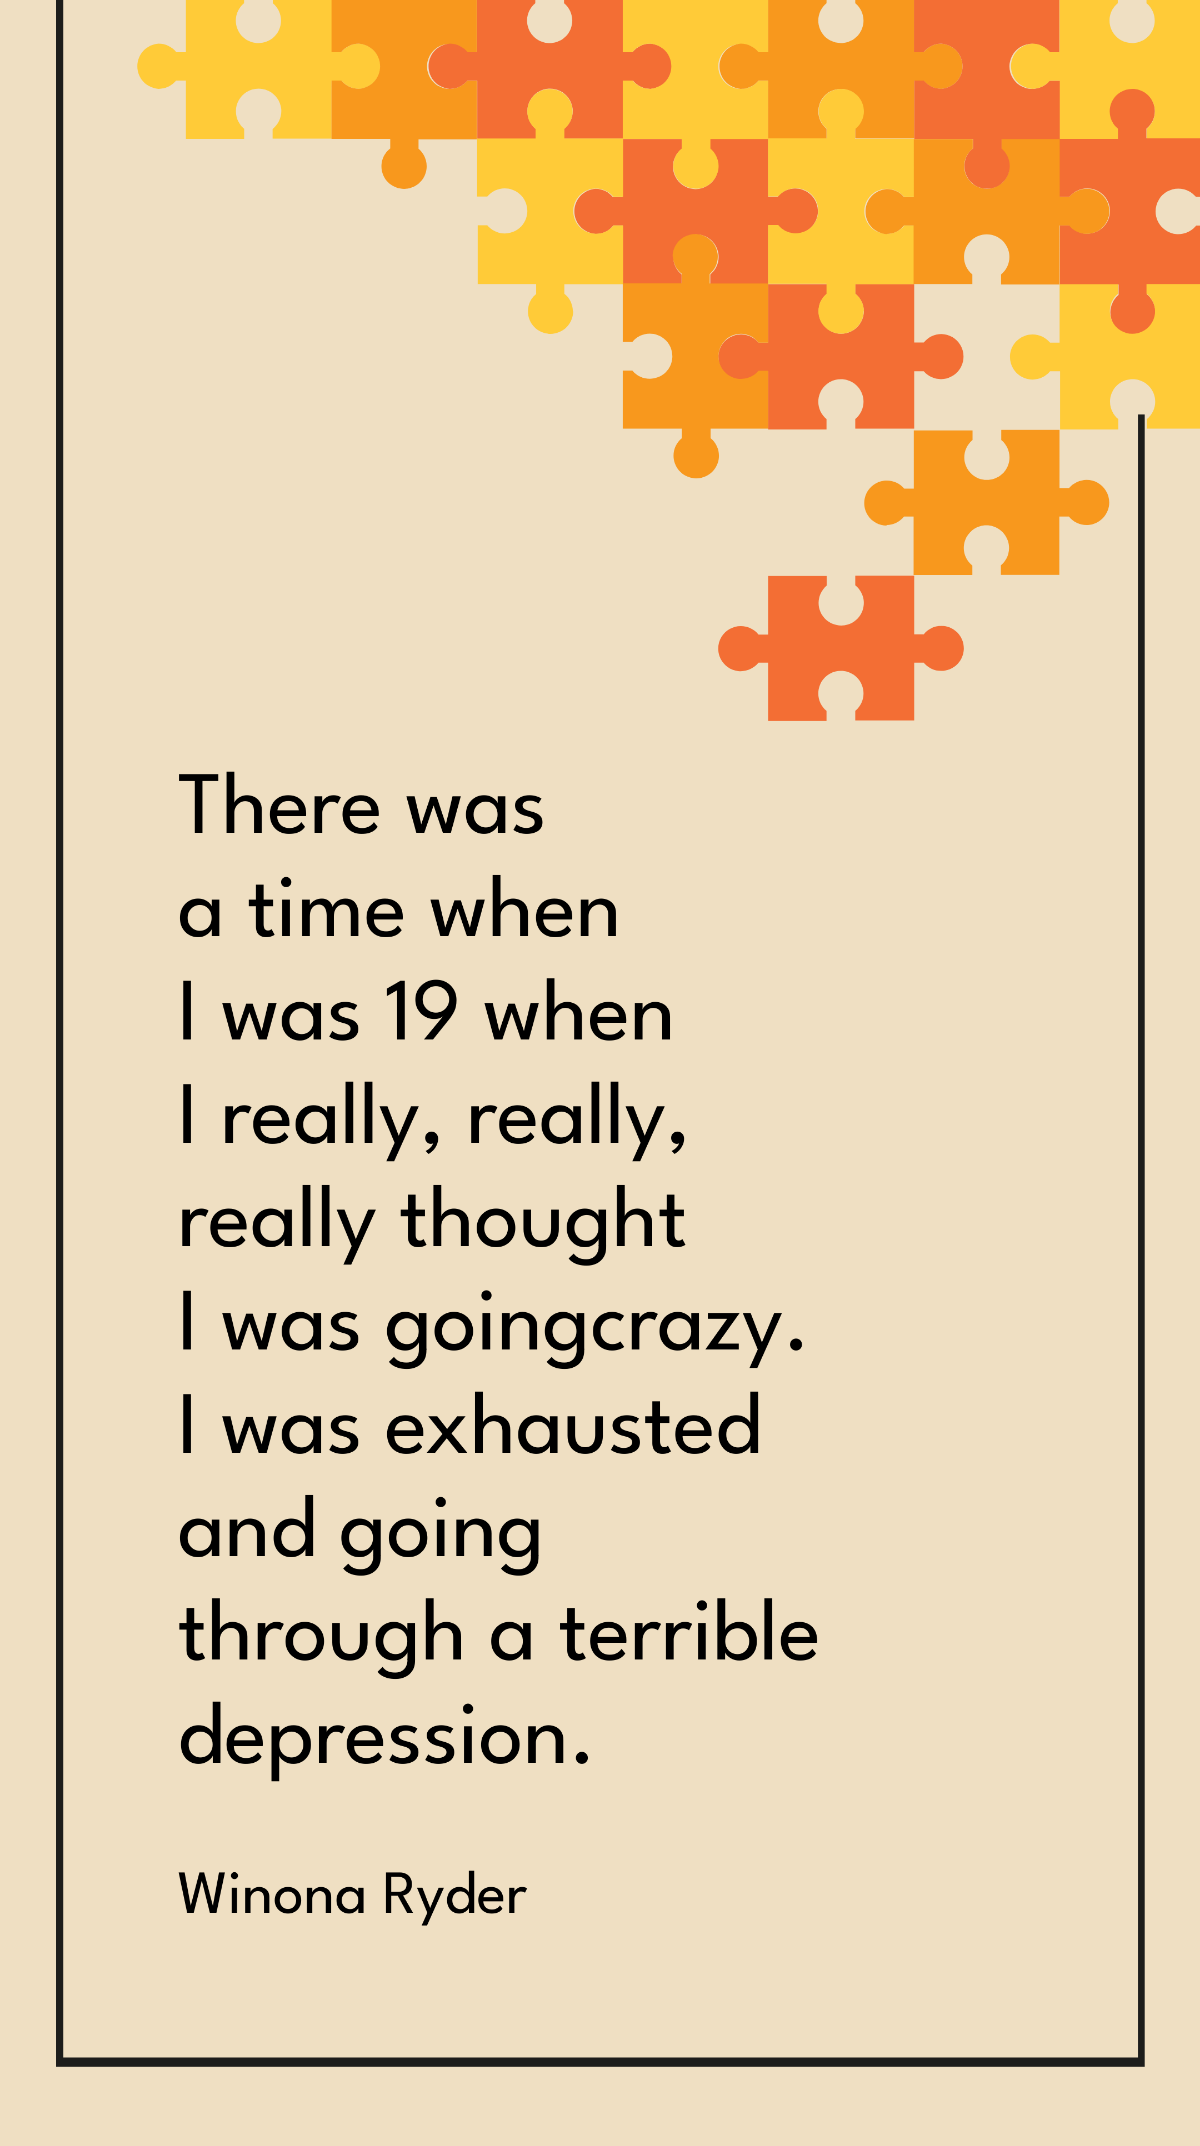 Winona Ryder - There was a time when I was 19 when I really, really, really thought I was going crazy. I was exhausted and going through a terrible depression. Template